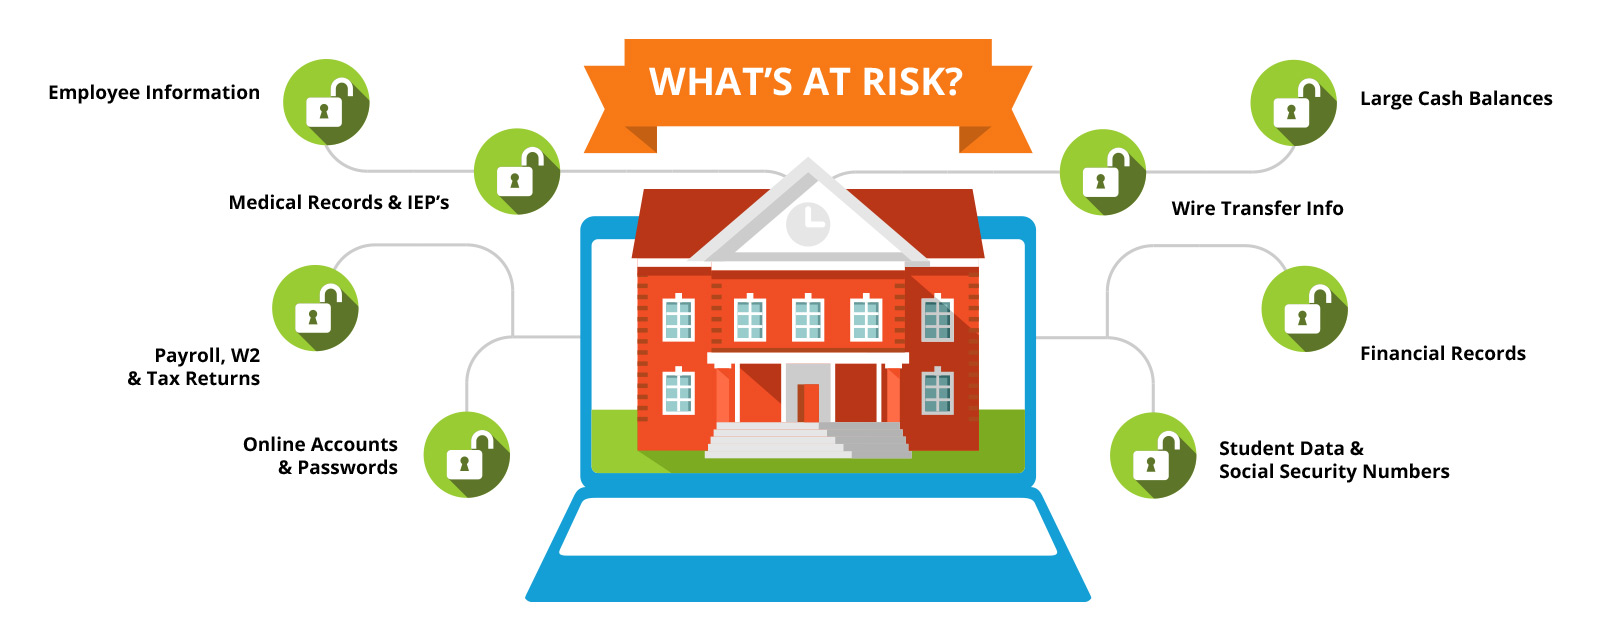 Image of What is at Risk in a School Cyber Environment